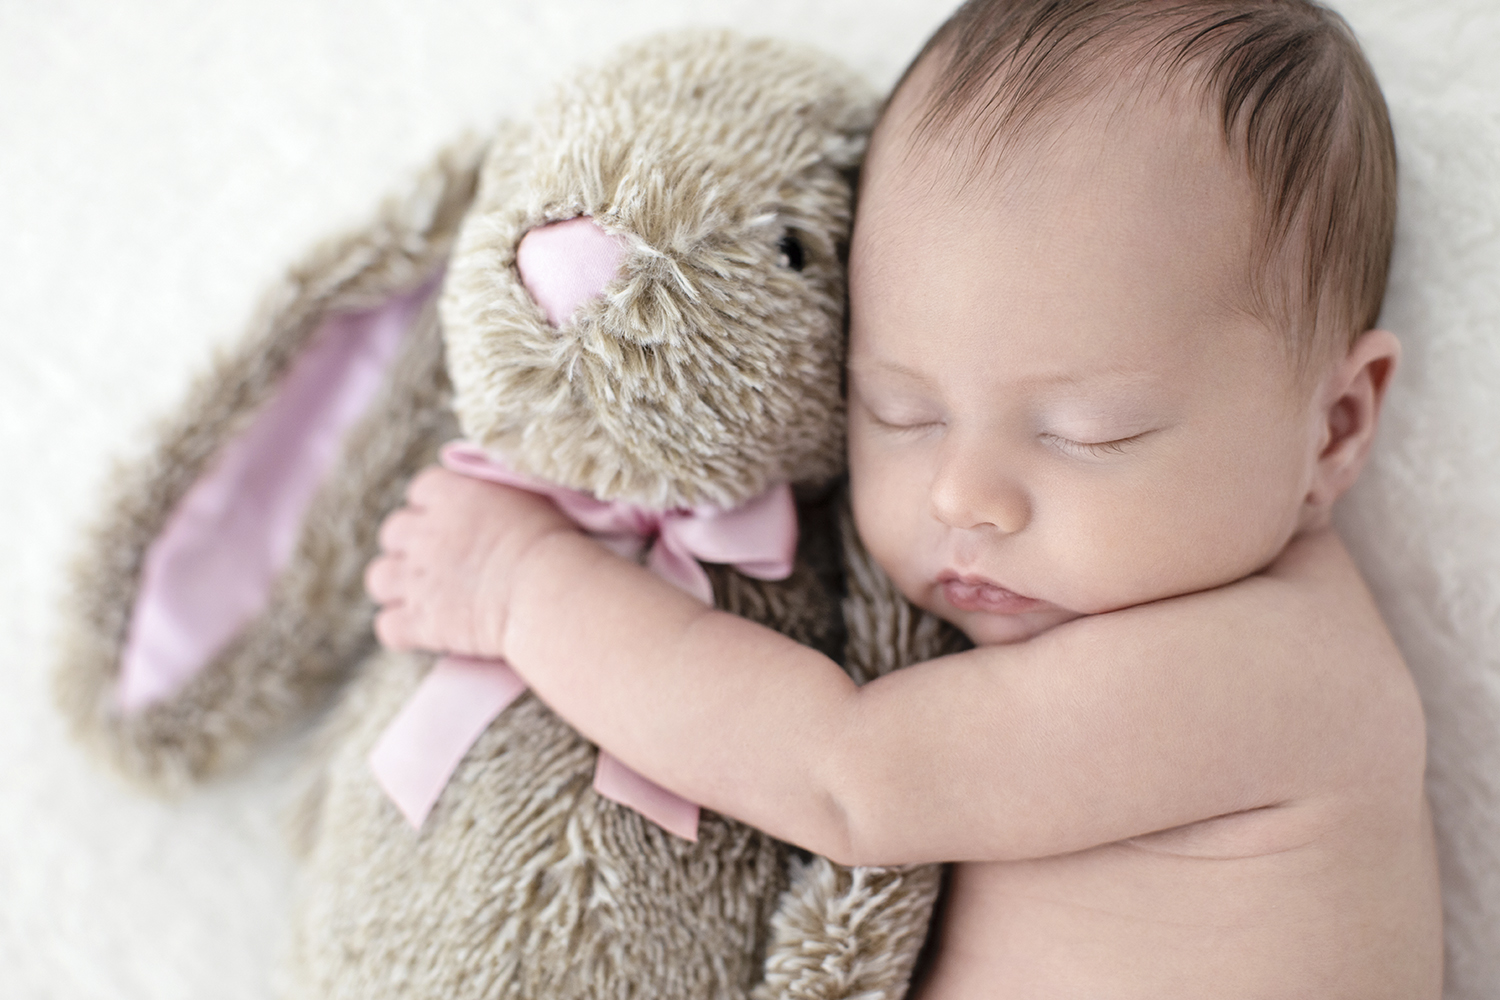 adorable baby holding on to a stuffed animal